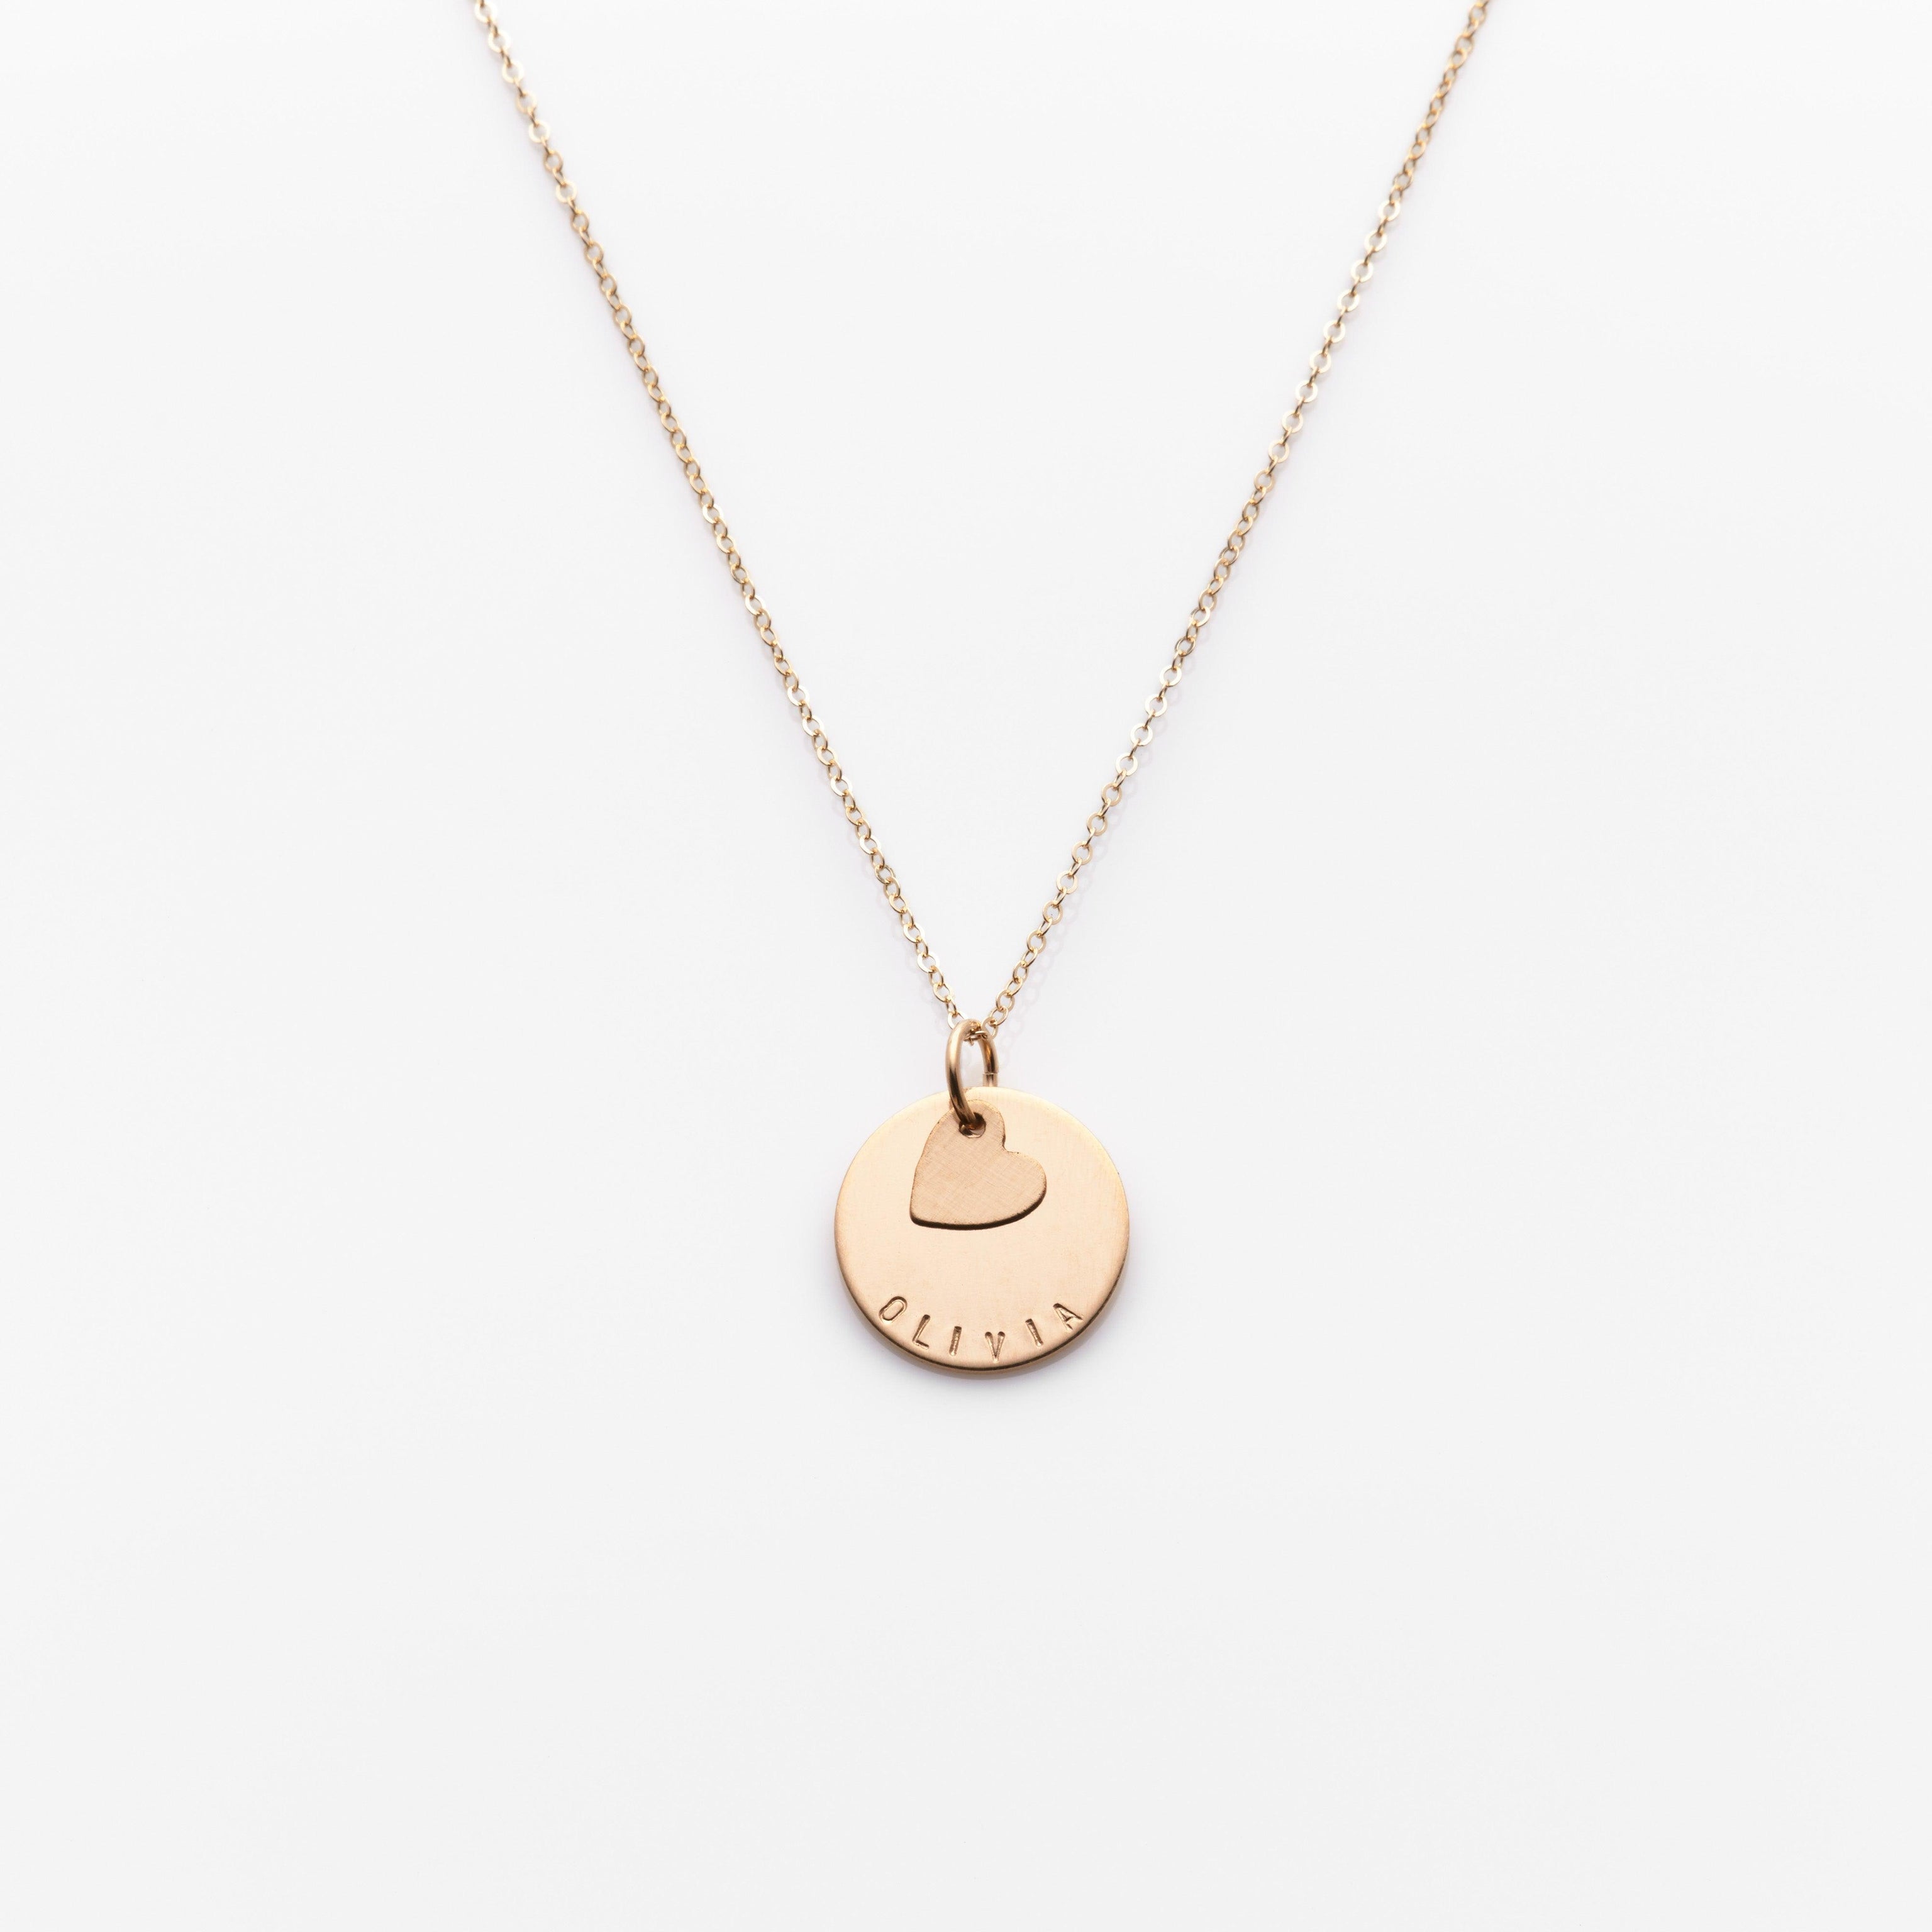 Name With Heart Necklace | Gold Jewelry